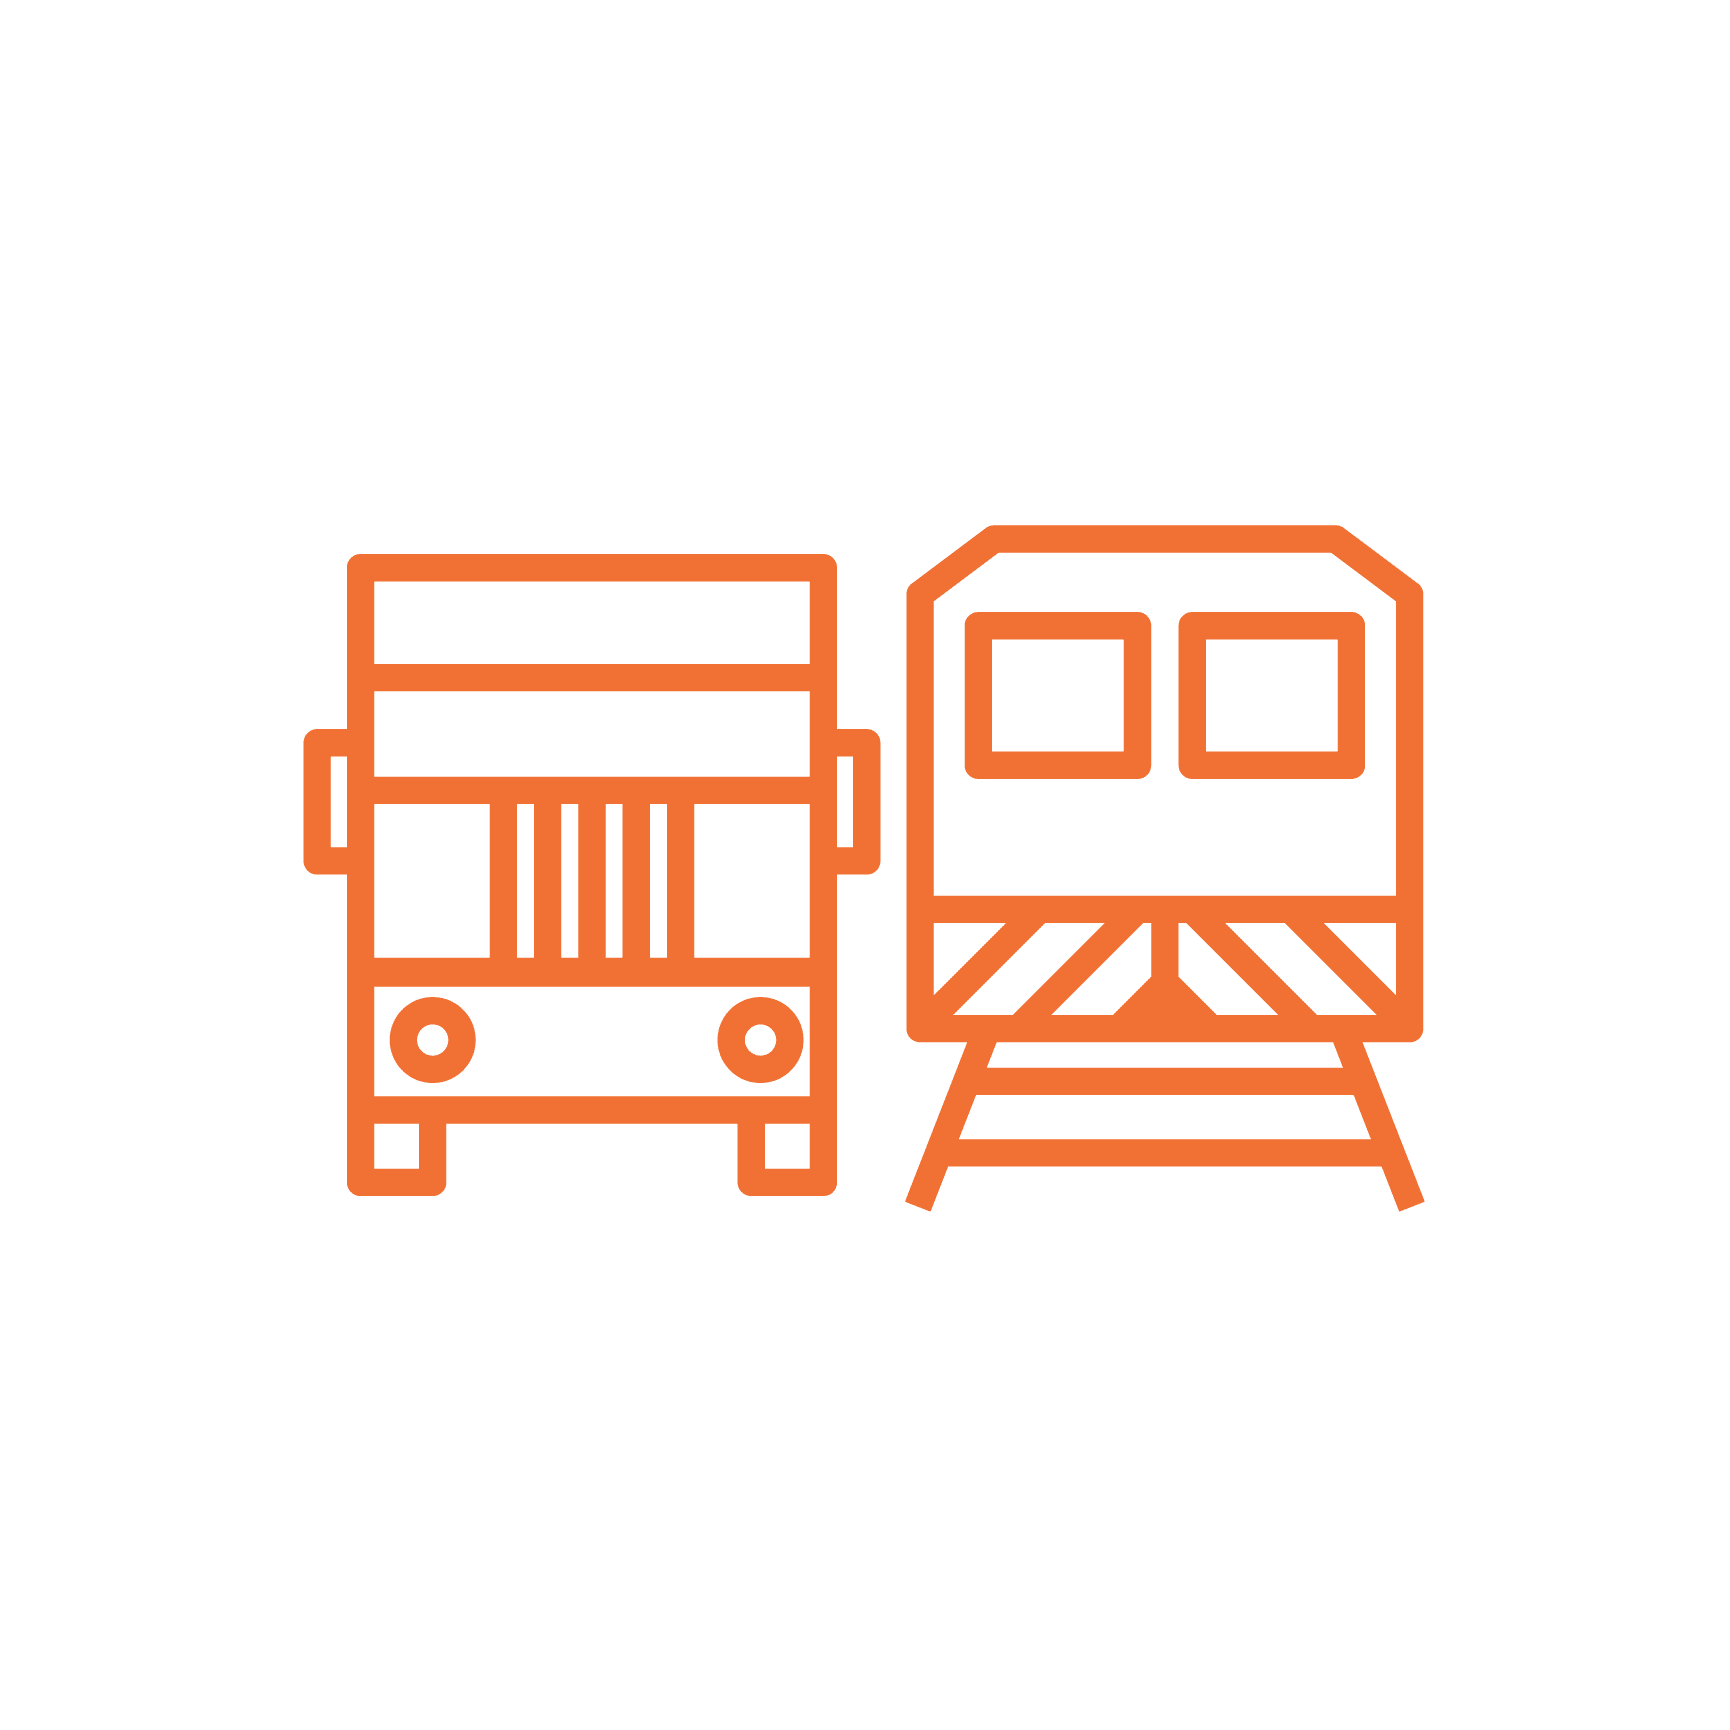 MOVEMENT: Grow the volume of freight moved by rail and improve the efficiency of road connections.